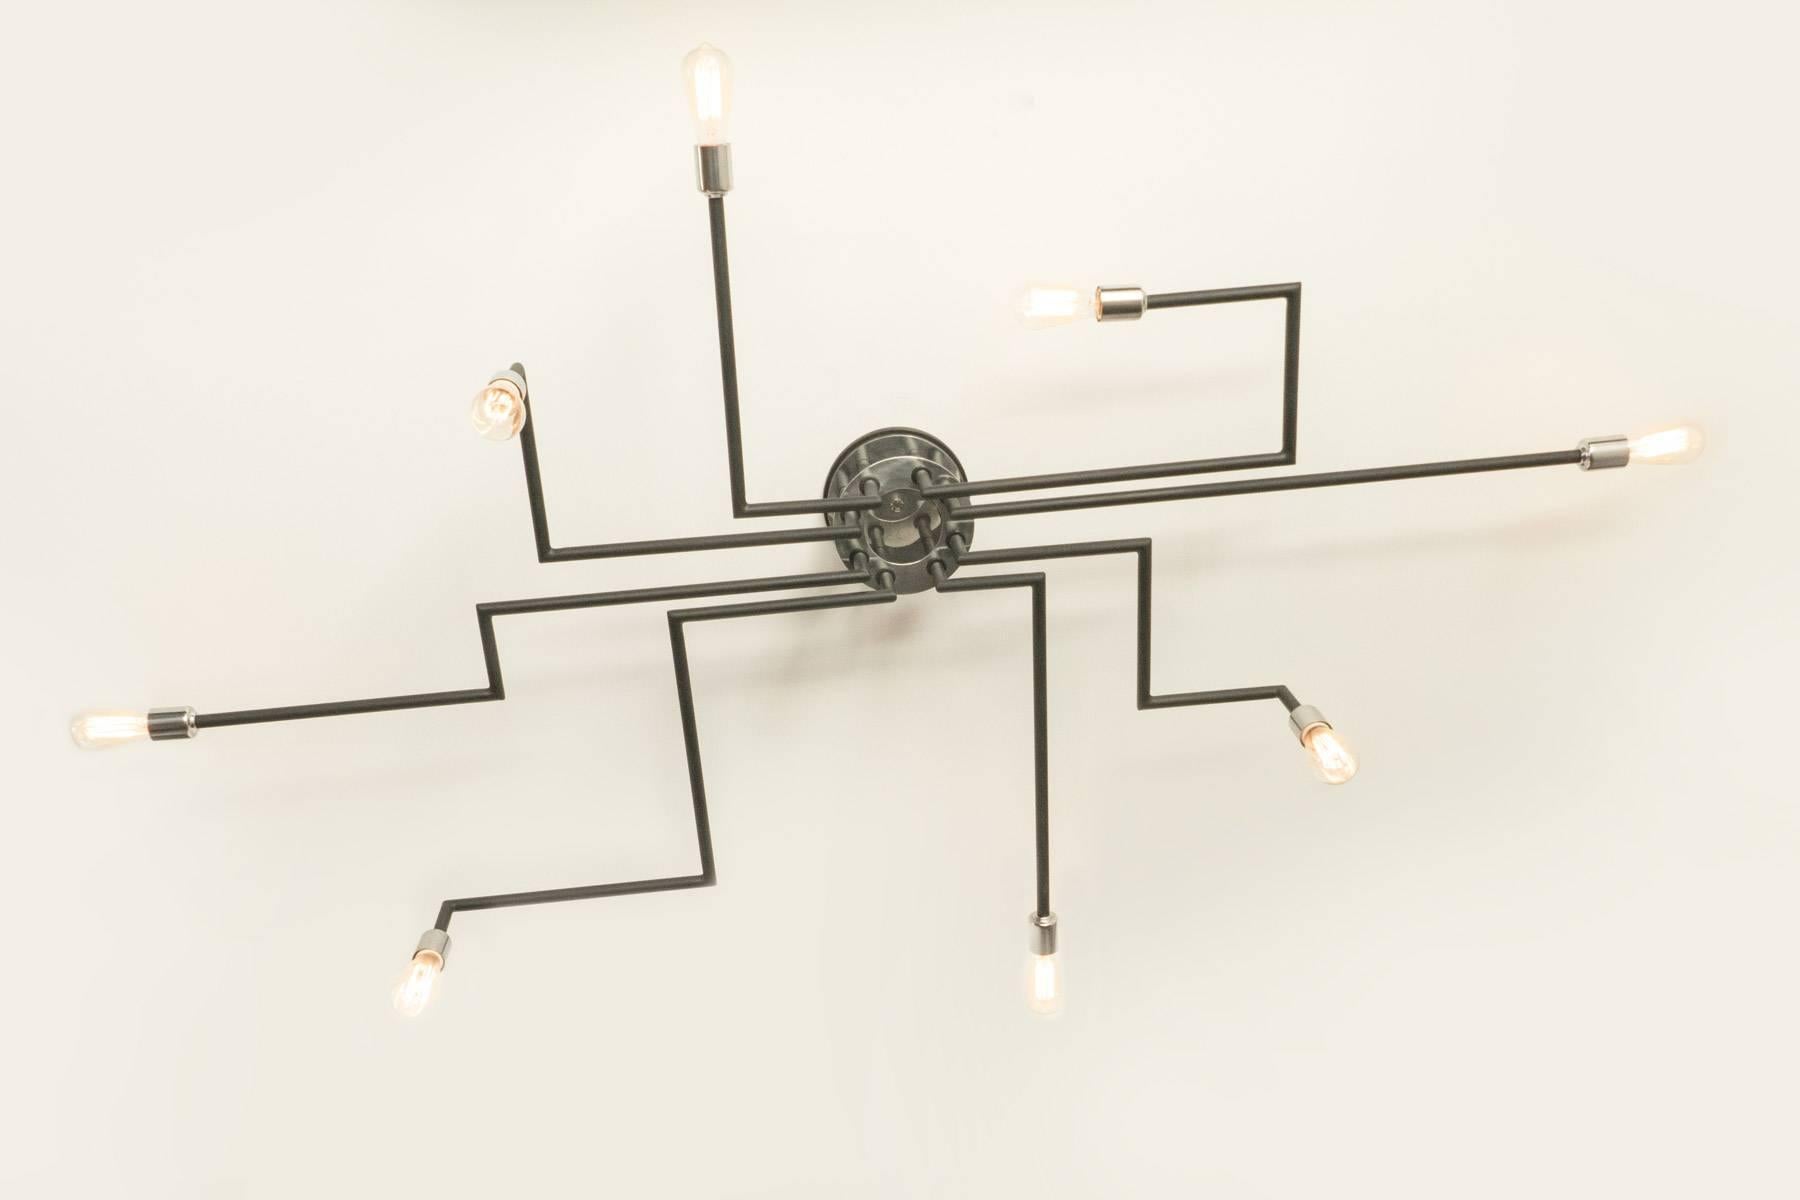 Eight-arm chandelier with Minimalist design. The fixture hugs the ceiling with its eight asymmetrical arms. Black enamel finish with polished aluminum accents. Light uses eight medium based sockets. Max wattage 100 each.